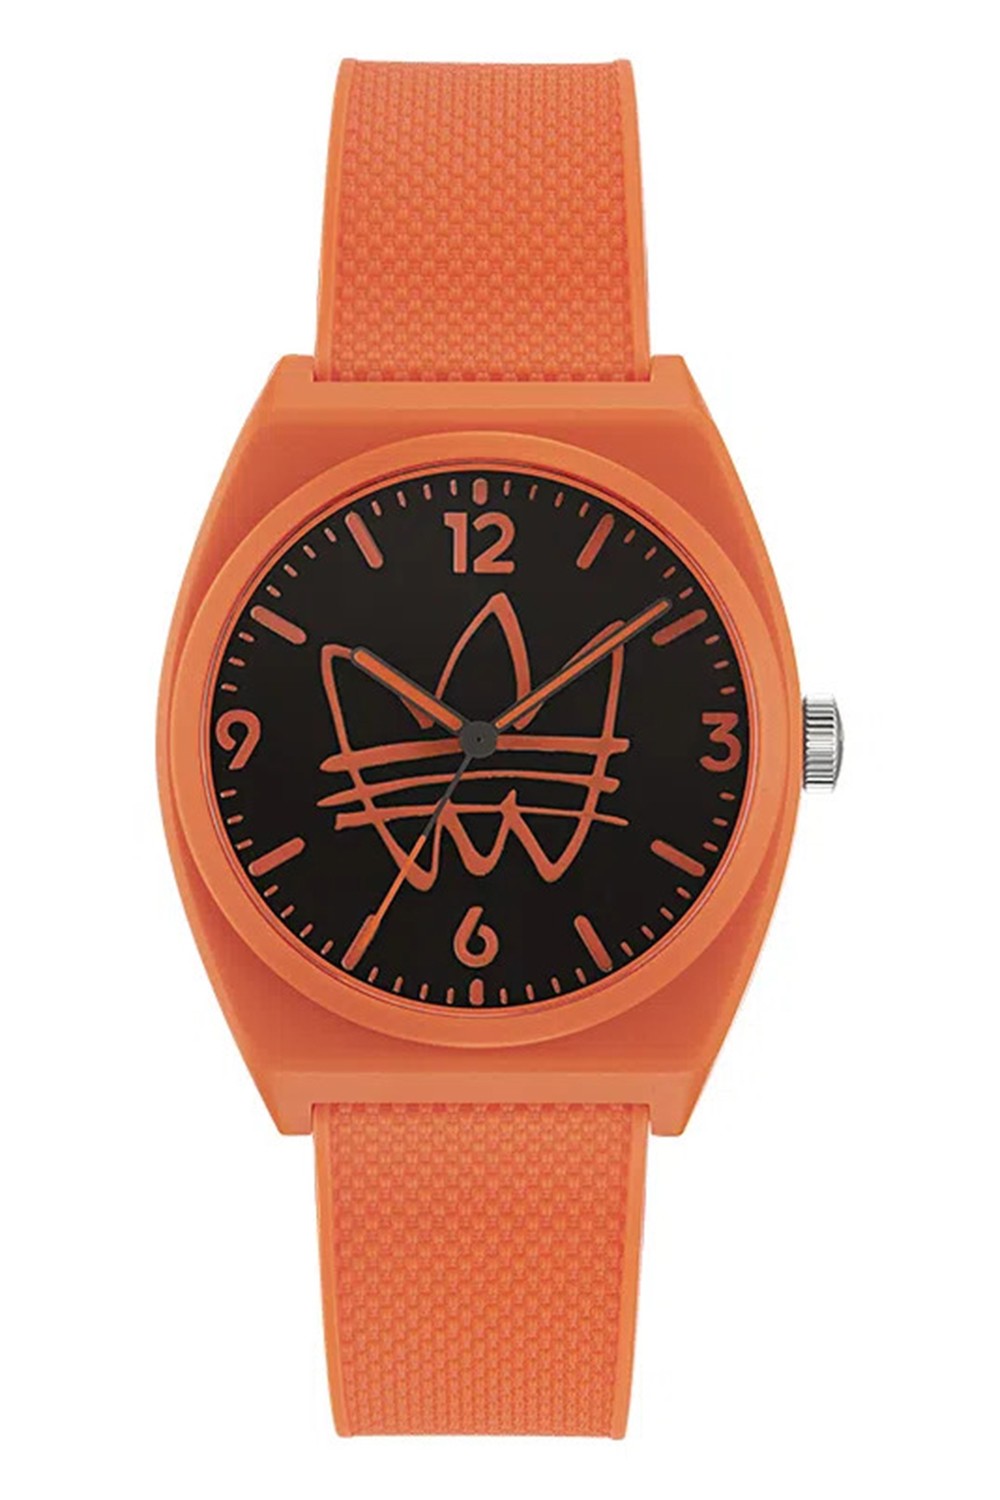 Adidas Project AOST22562 Orange Comprar Clicktime.eu» Rubber Watch Project Rubber unisex Women\'s | Watch Watch Originals Orange | unisex AOST22562 Watch Adidas online Adidas Two Comprar AOST22562 Barato Two